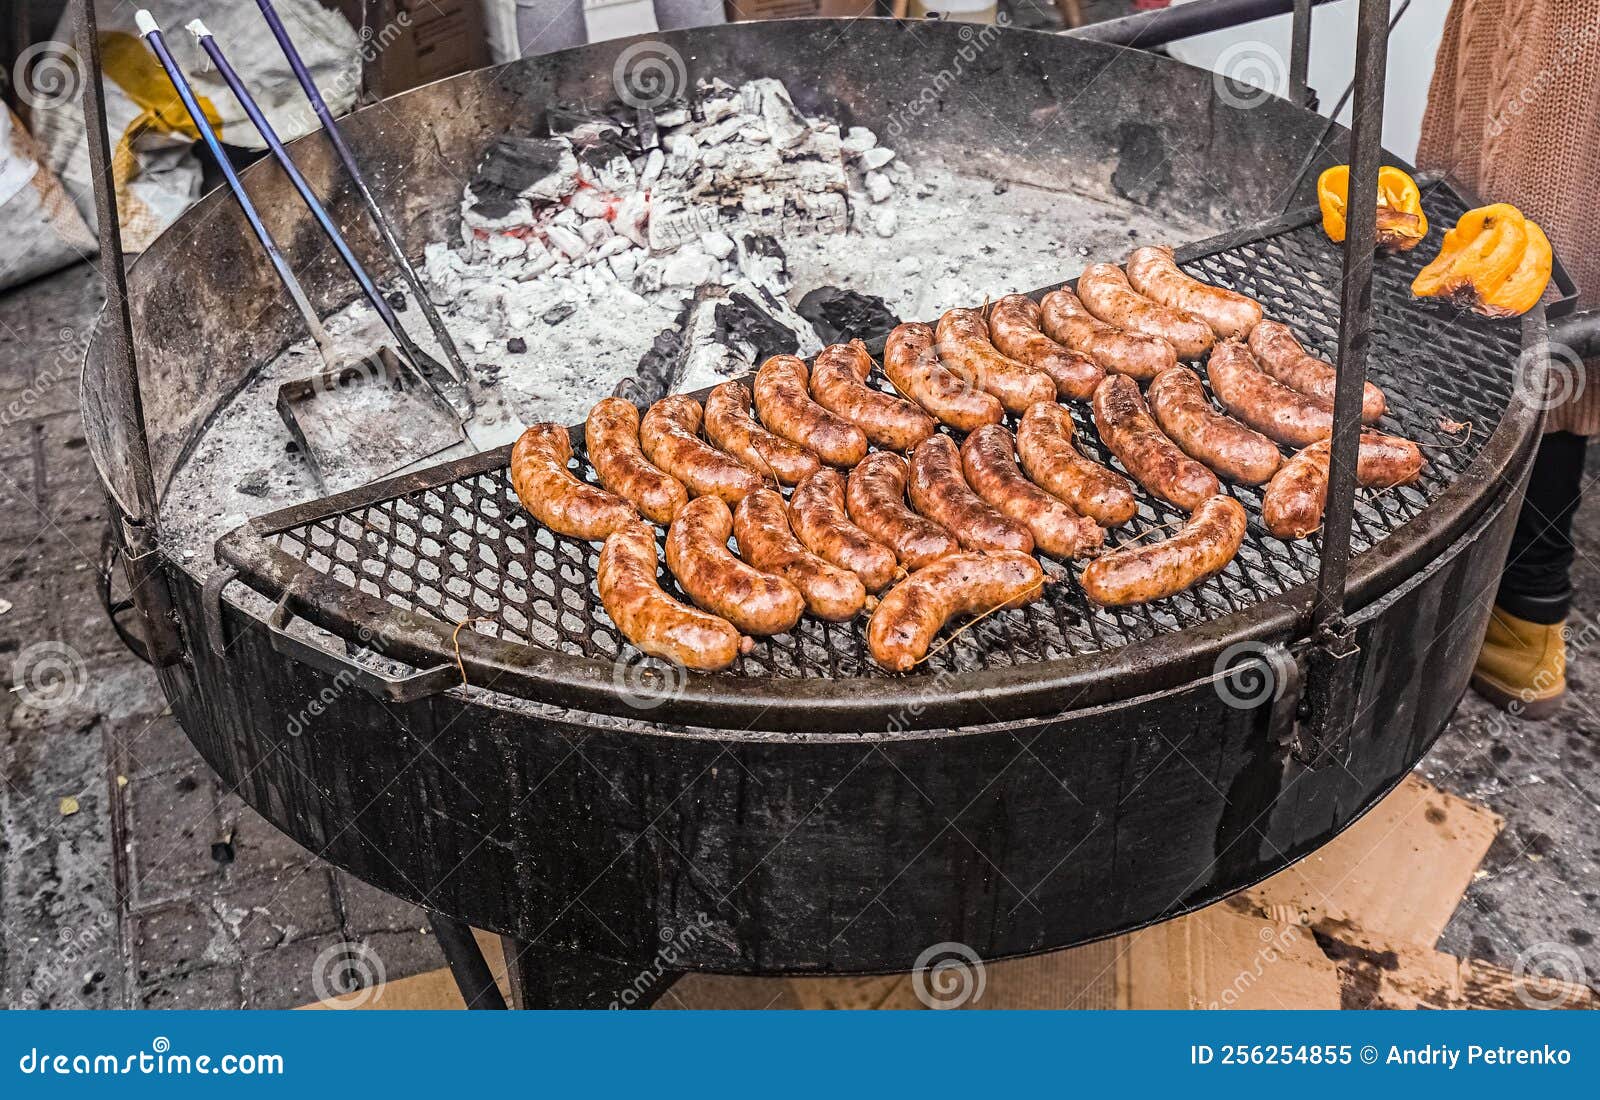 sausages on the grill, traditional argentinean food